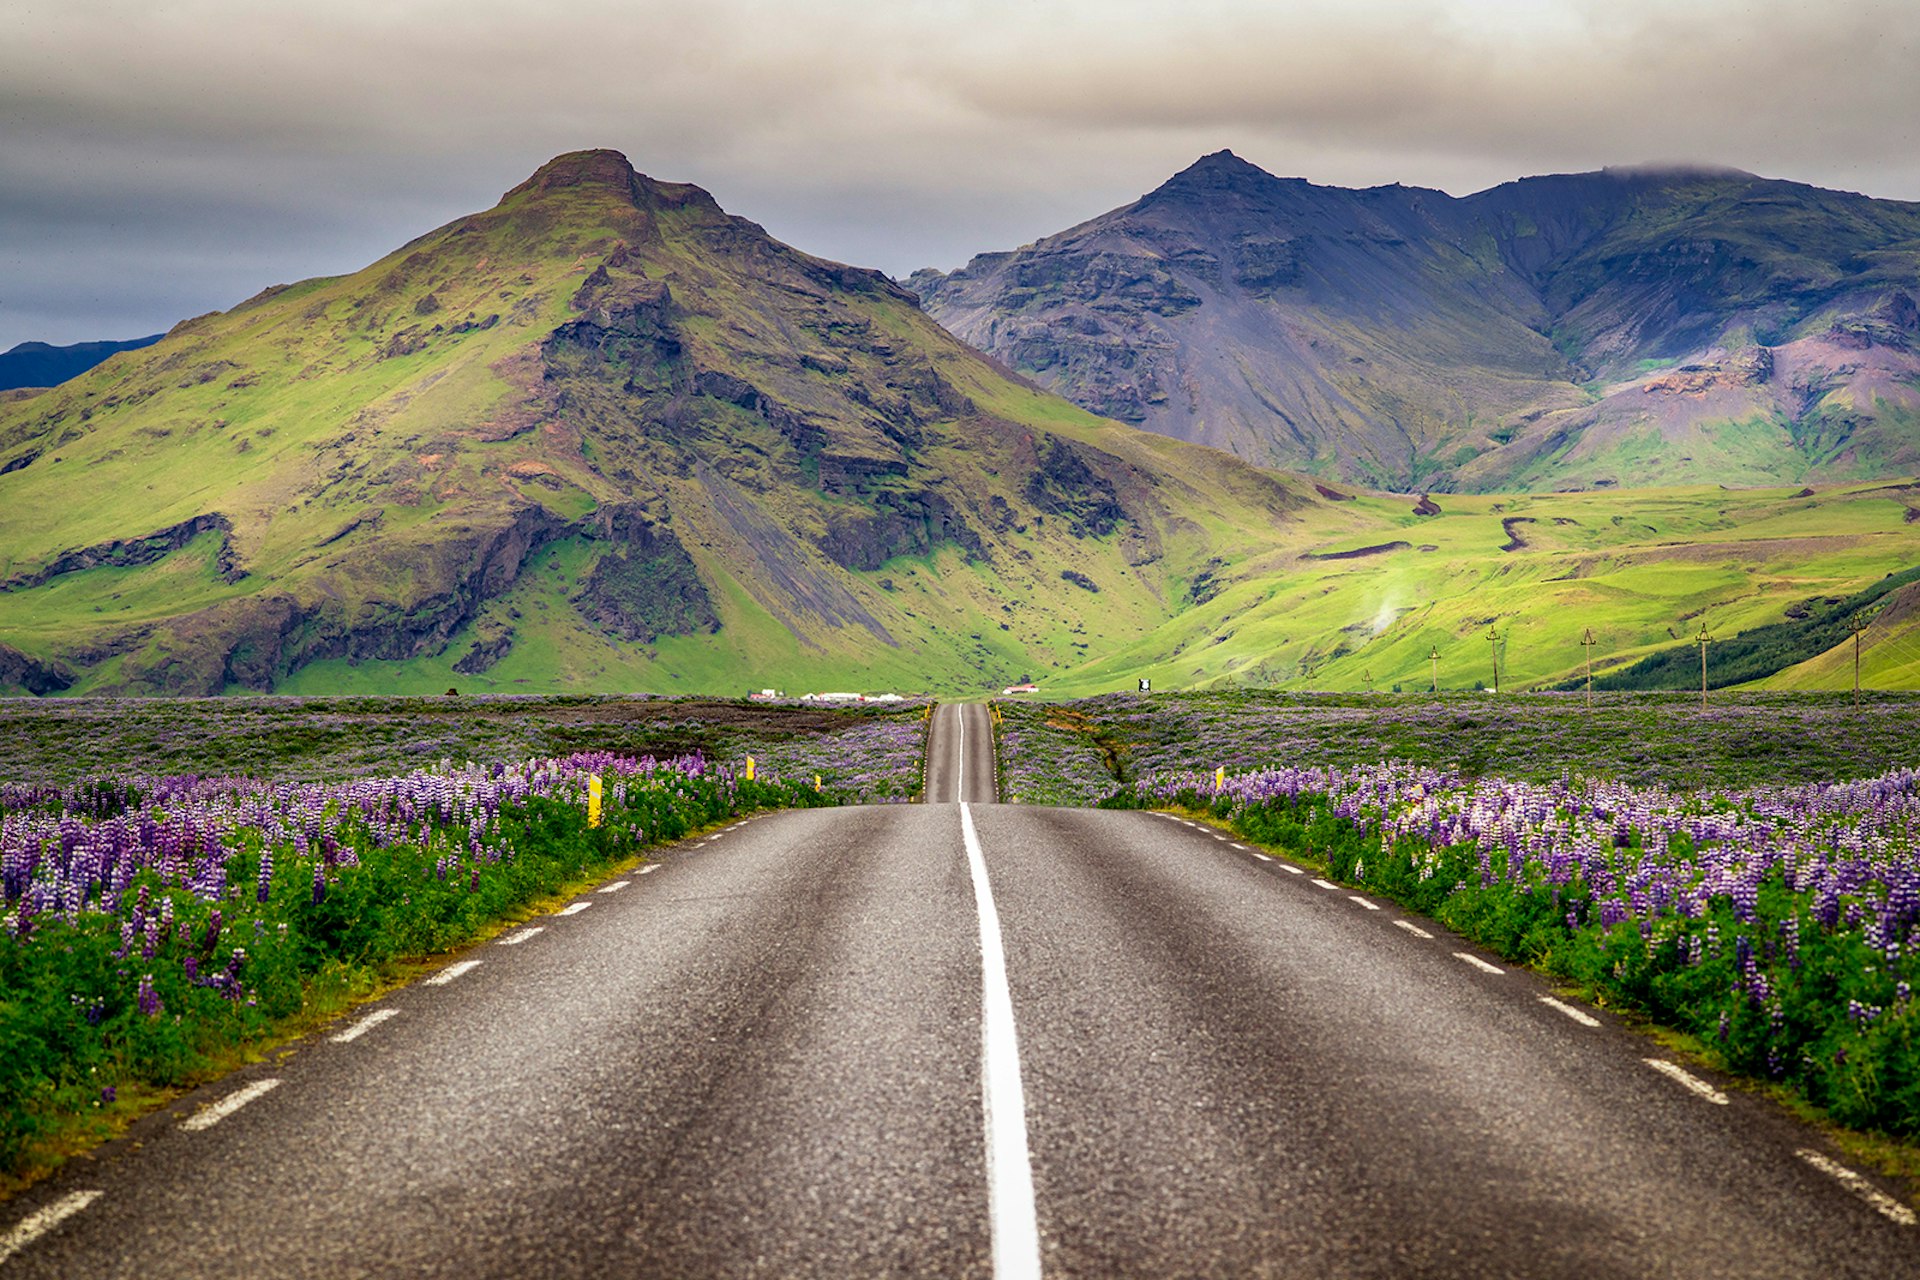 A two-lane road stretches straight ahead towards green, grey and purple hued mountains. Iceland.